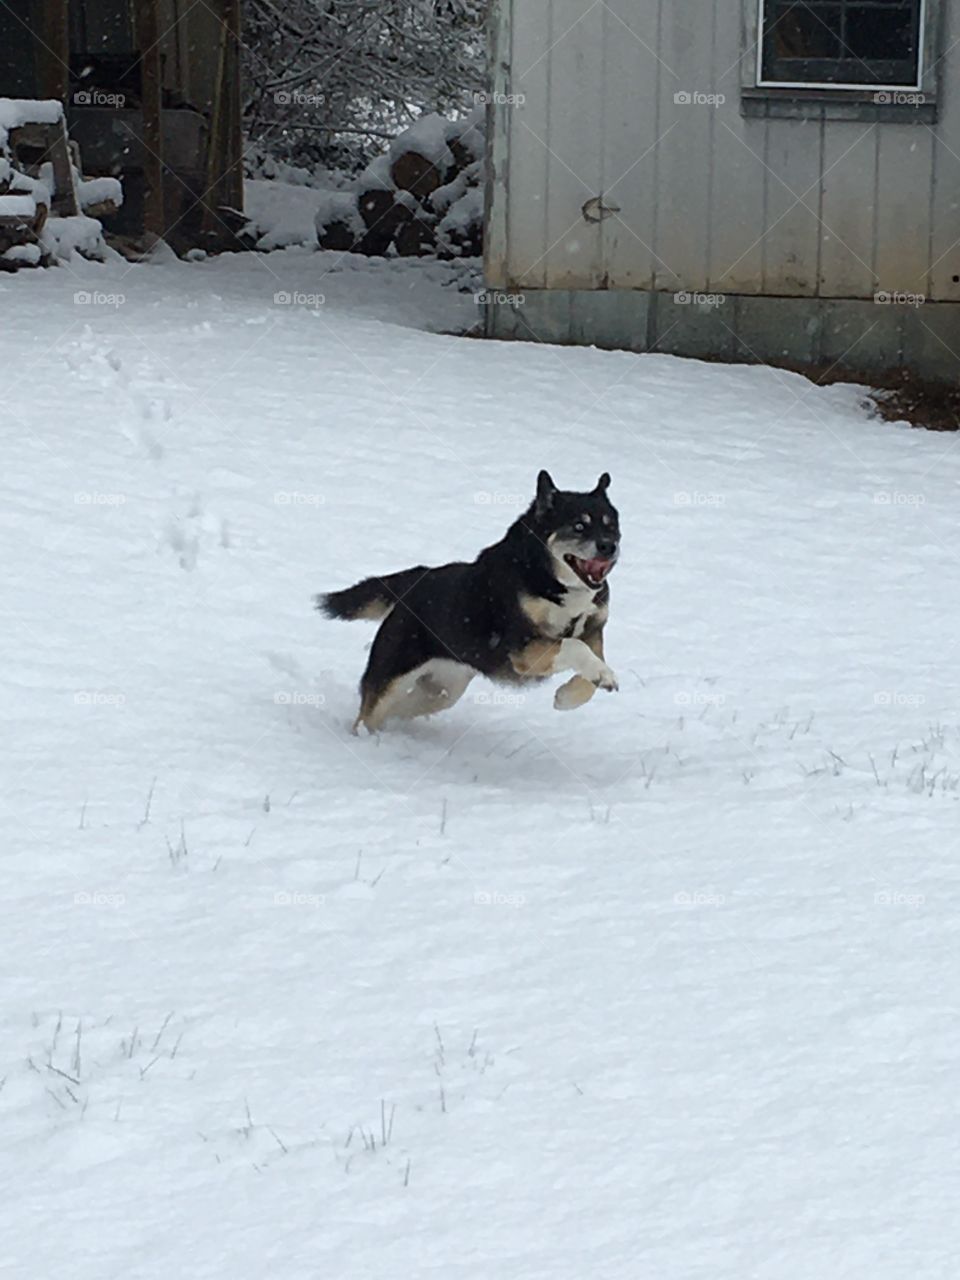 Shusky playing in the snow!